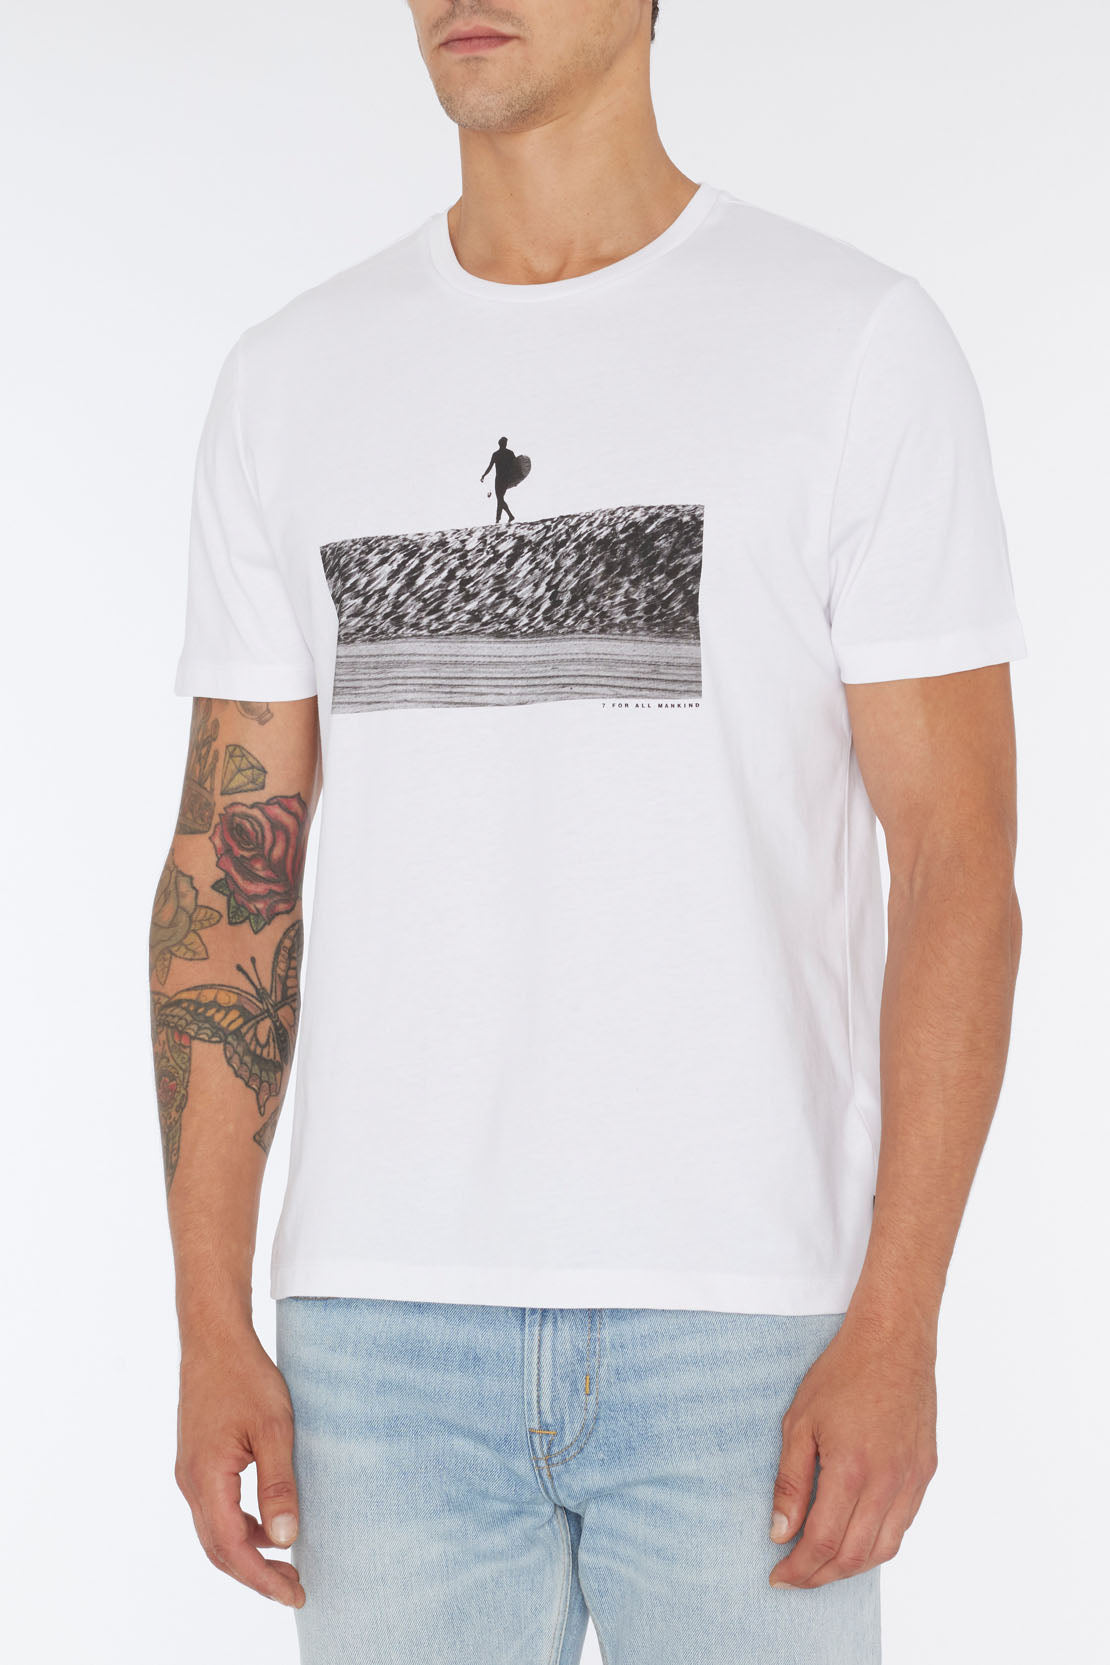 7 FOR ALL MANKIND - White Photographic T-Shirt With Surf Beach Print JSLM332GWS